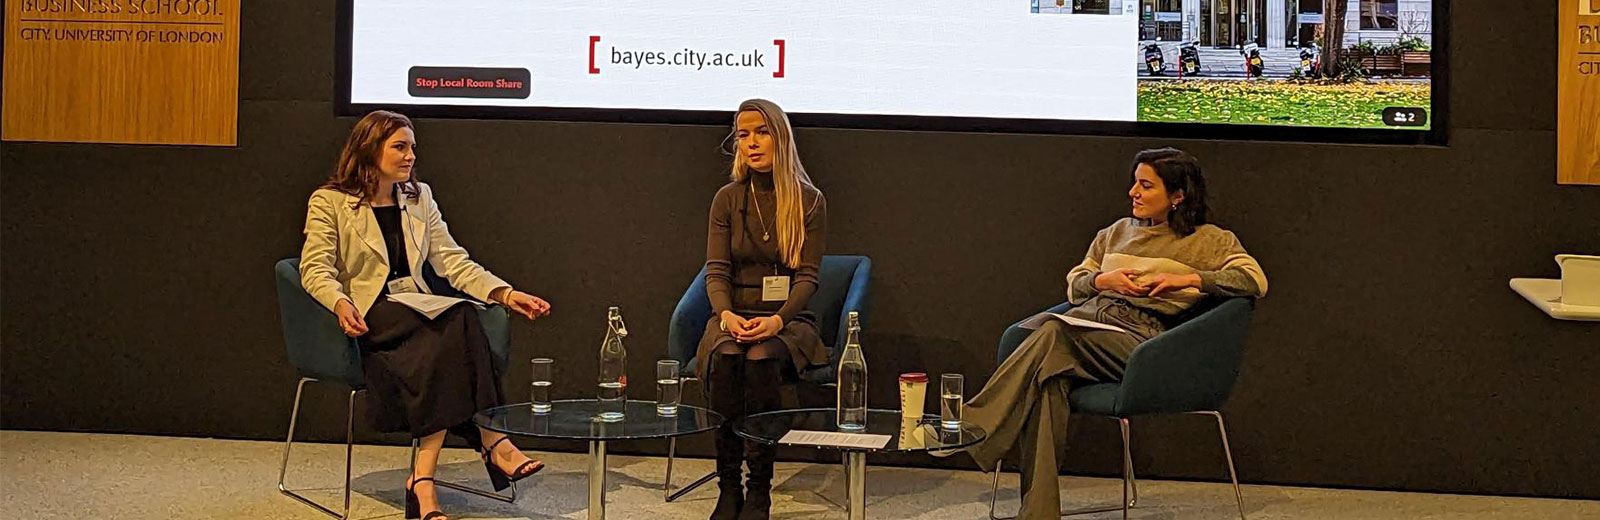 Image of speaker Natalie Bonnick, Dr Stephanie A Baker and Daniella Isaacs sitting on chairs on stage at Bayes Business School in an amphitheatre lecture room. Behind them is a large screen with the event title